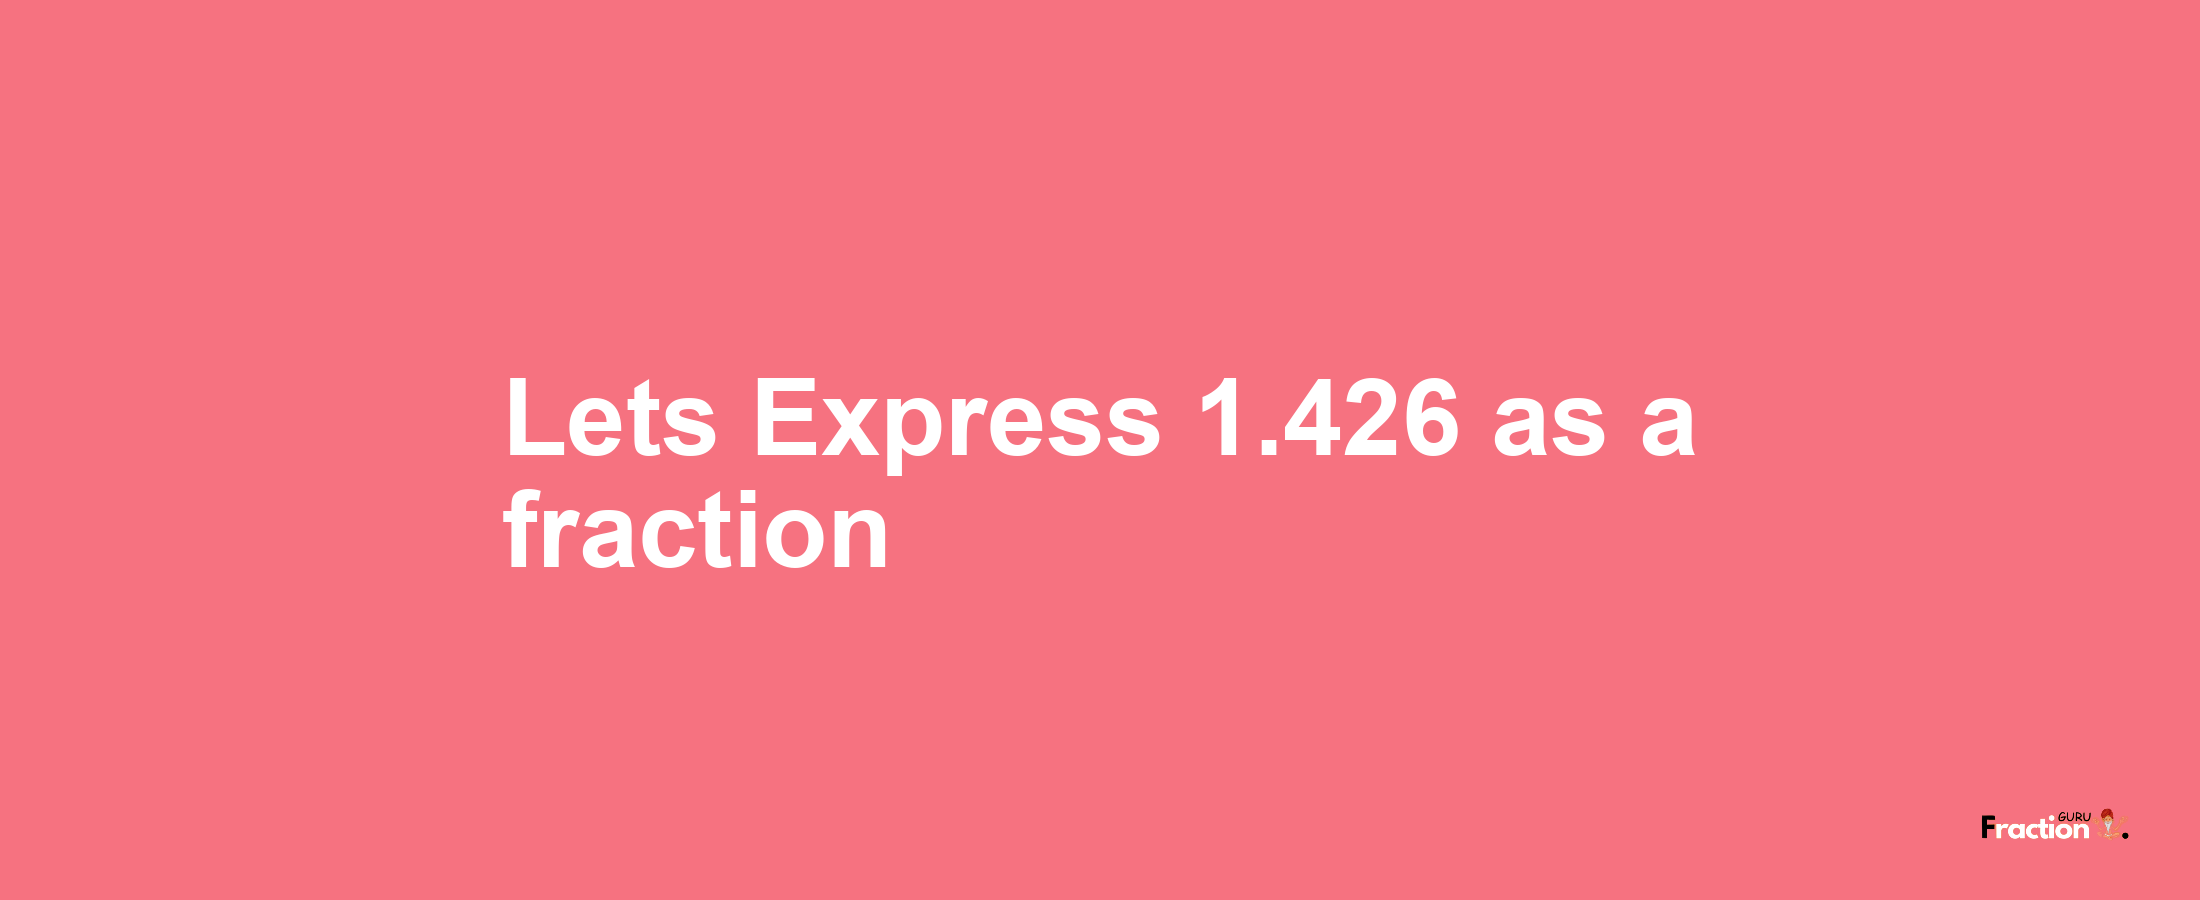 Lets Express 1.426 as afraction